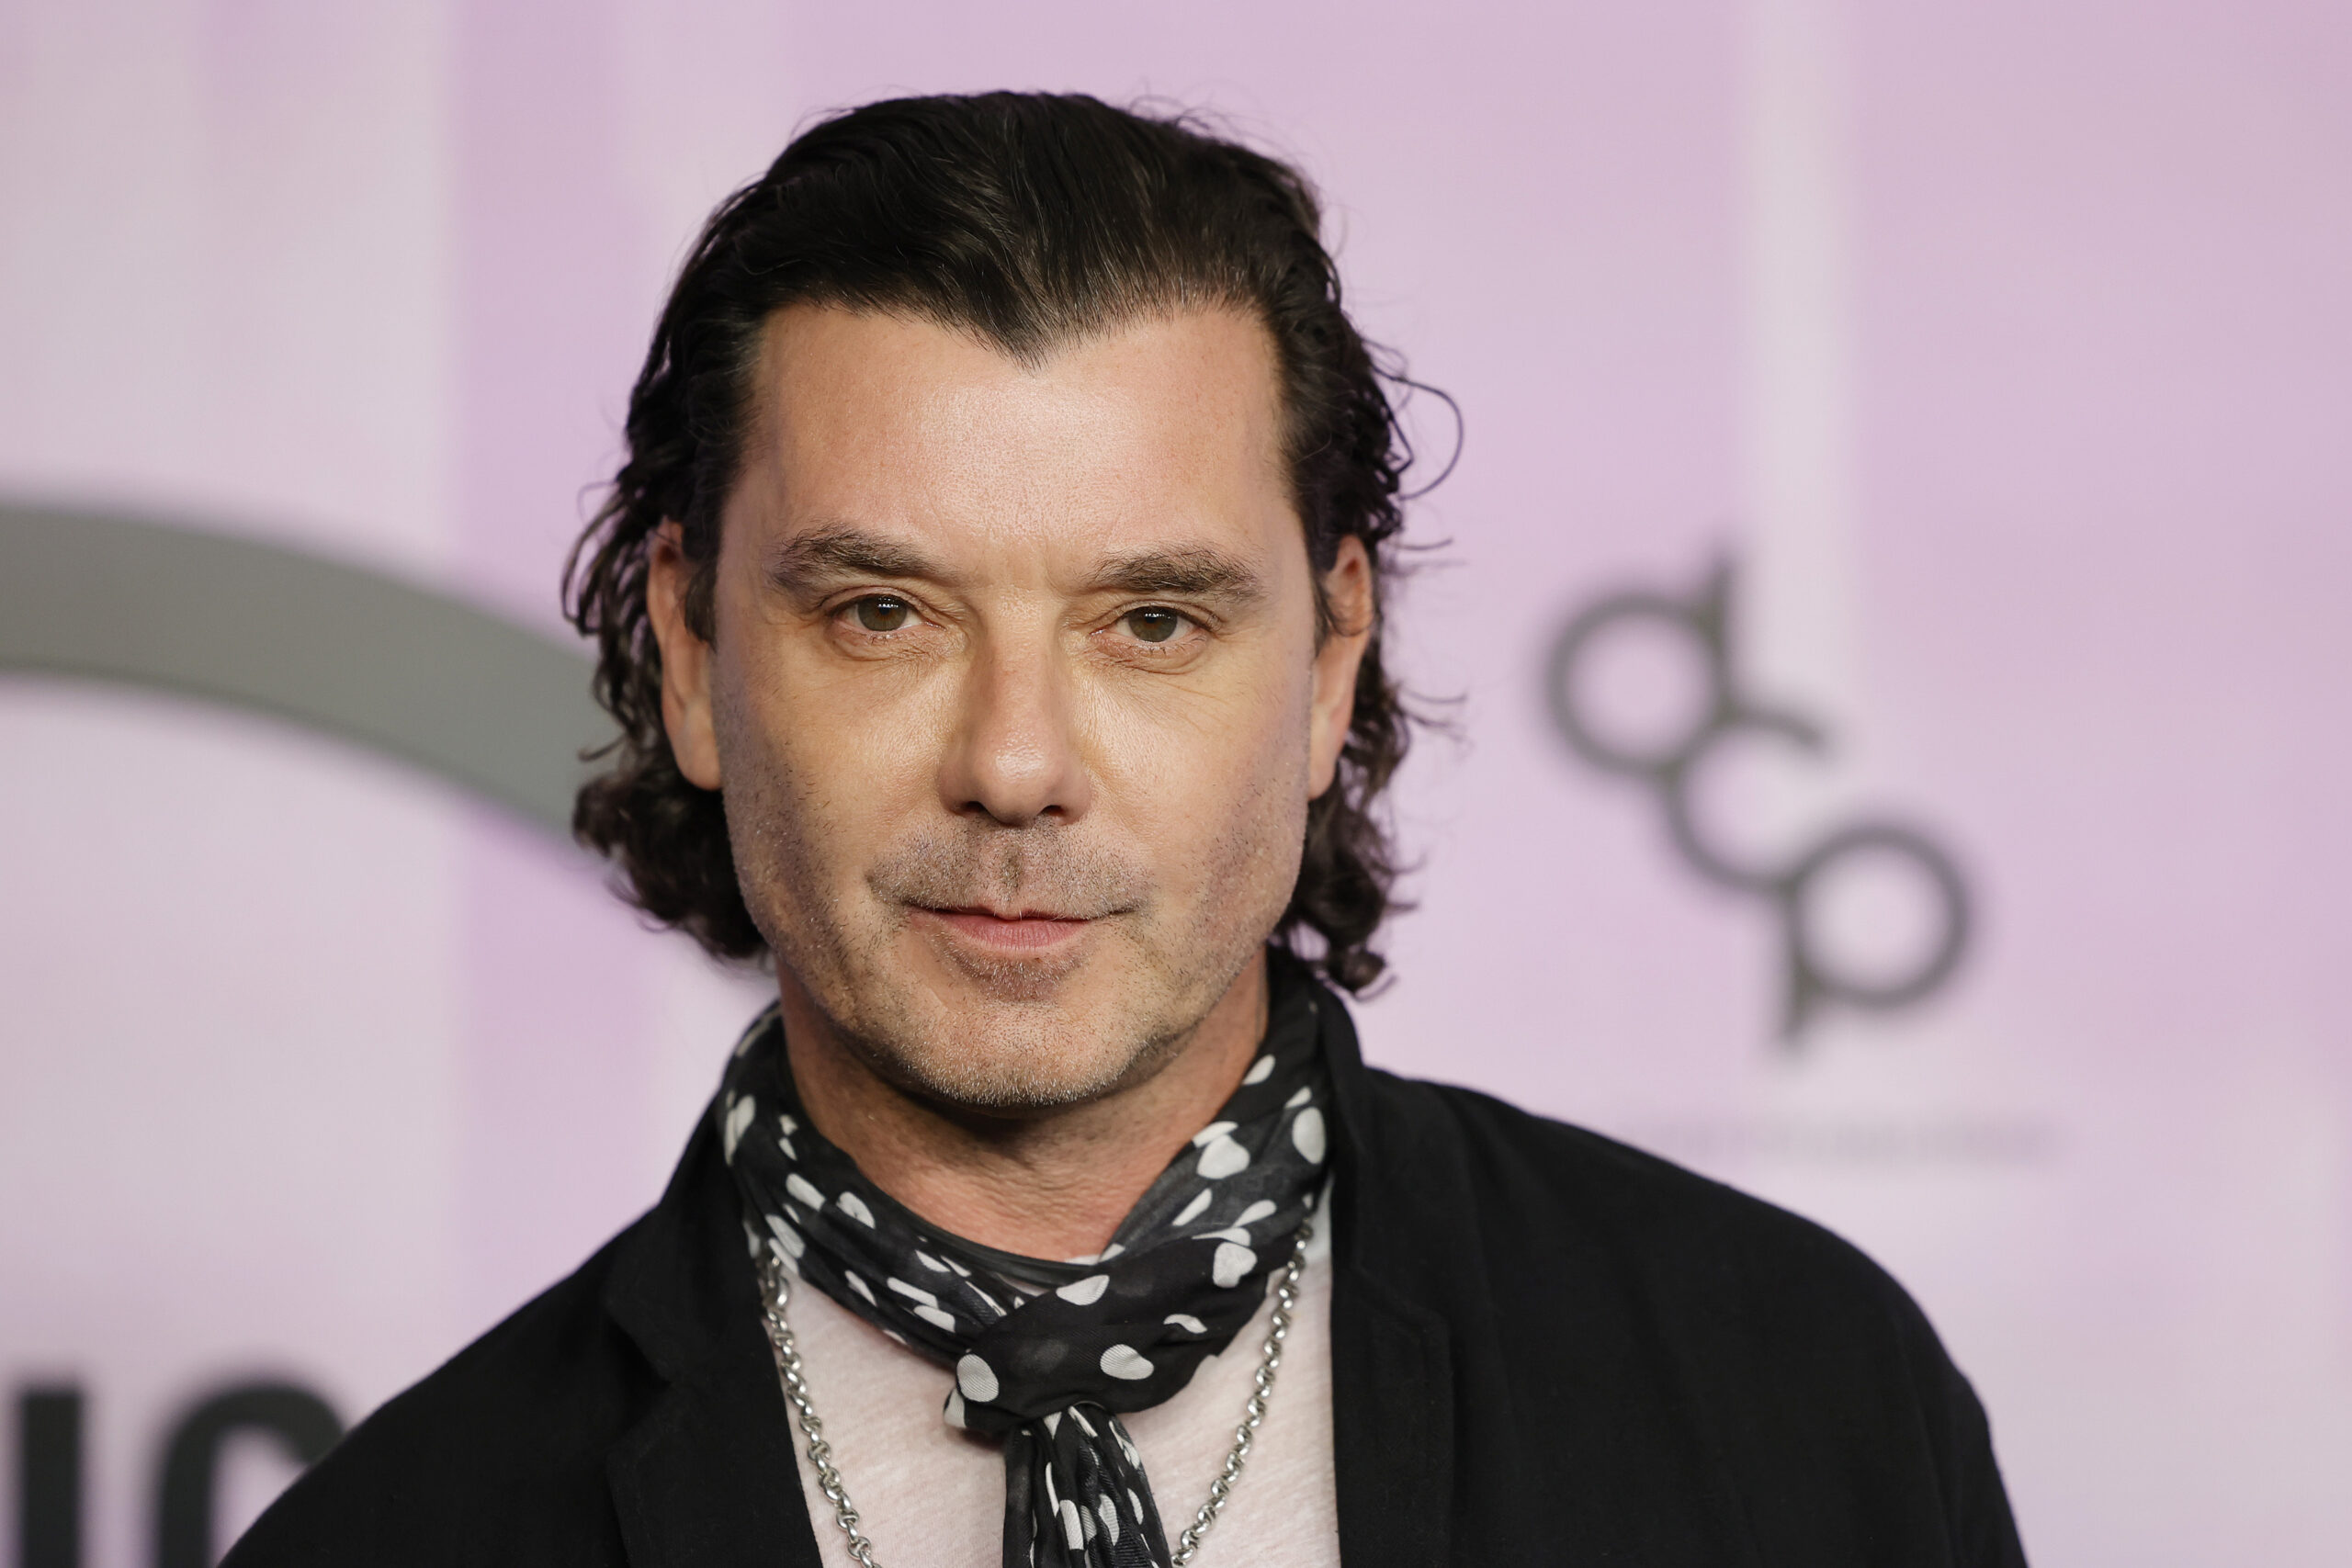 Gavin Rossdale is Now a Grandpa After Daughter Daisy Lowe Welcomes First Baby